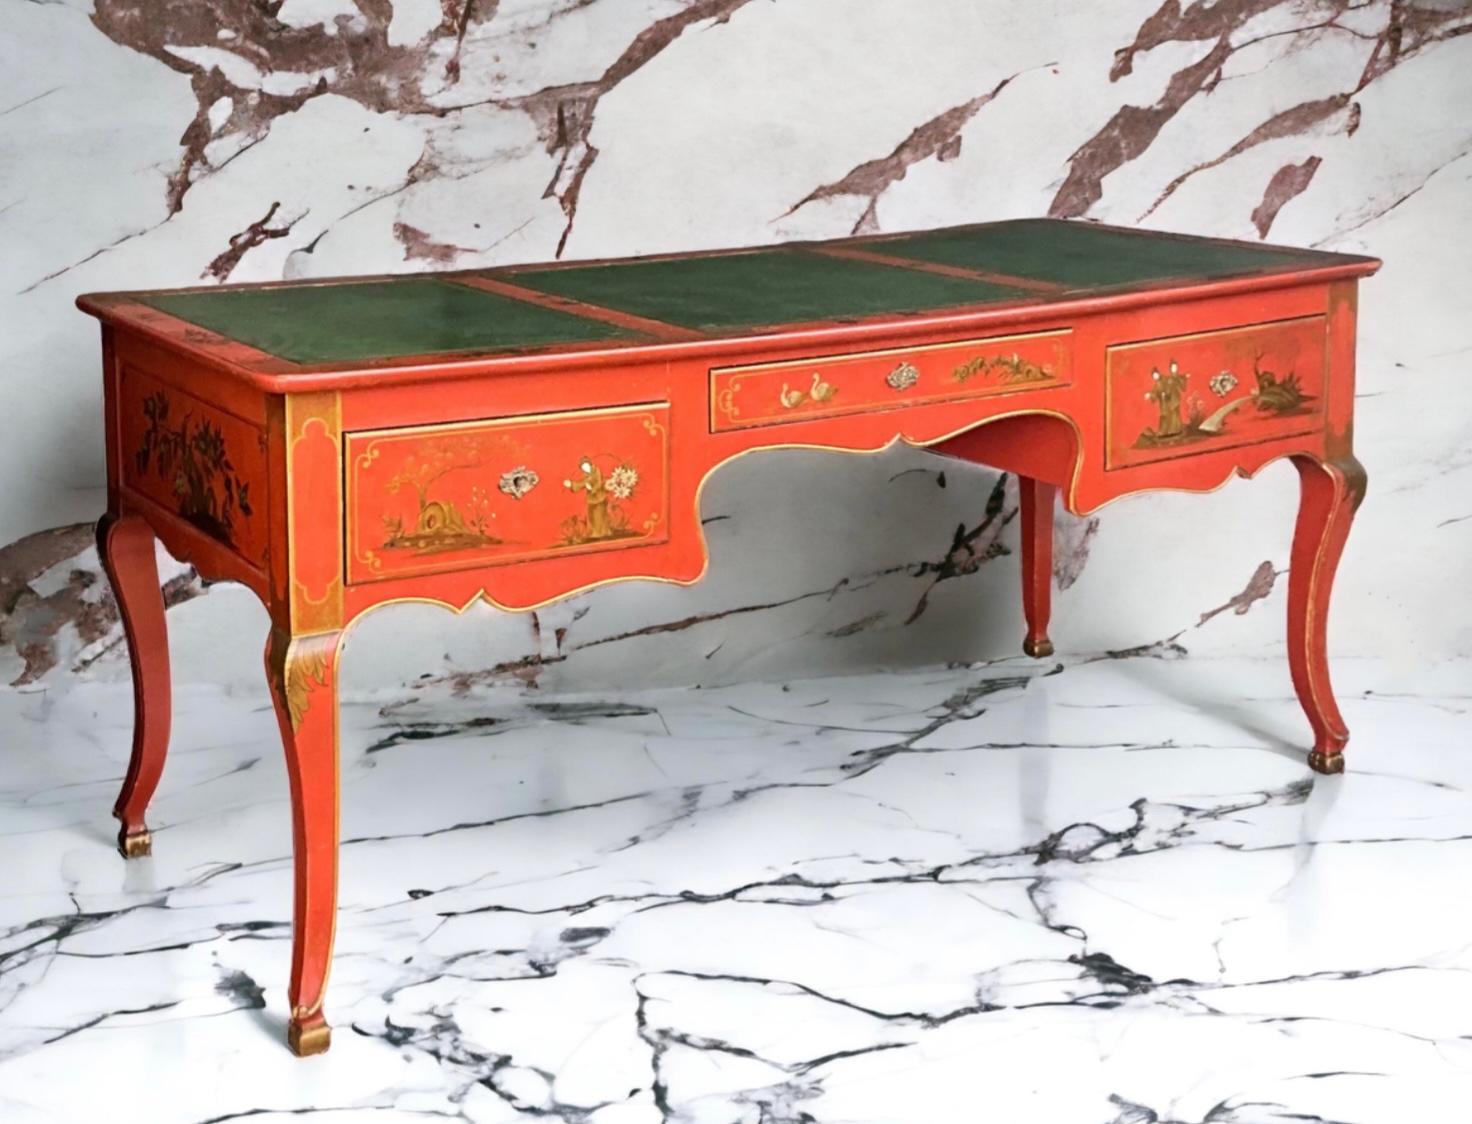 This is a beautiful vibrant Louis XV style chinoiserie desk by Baker Furniture Company. It is a Hermes orange with a bright green leather top. It has painted gilt accents and Chinese pastoral scenes throughout both sides of the desk. It is marked,